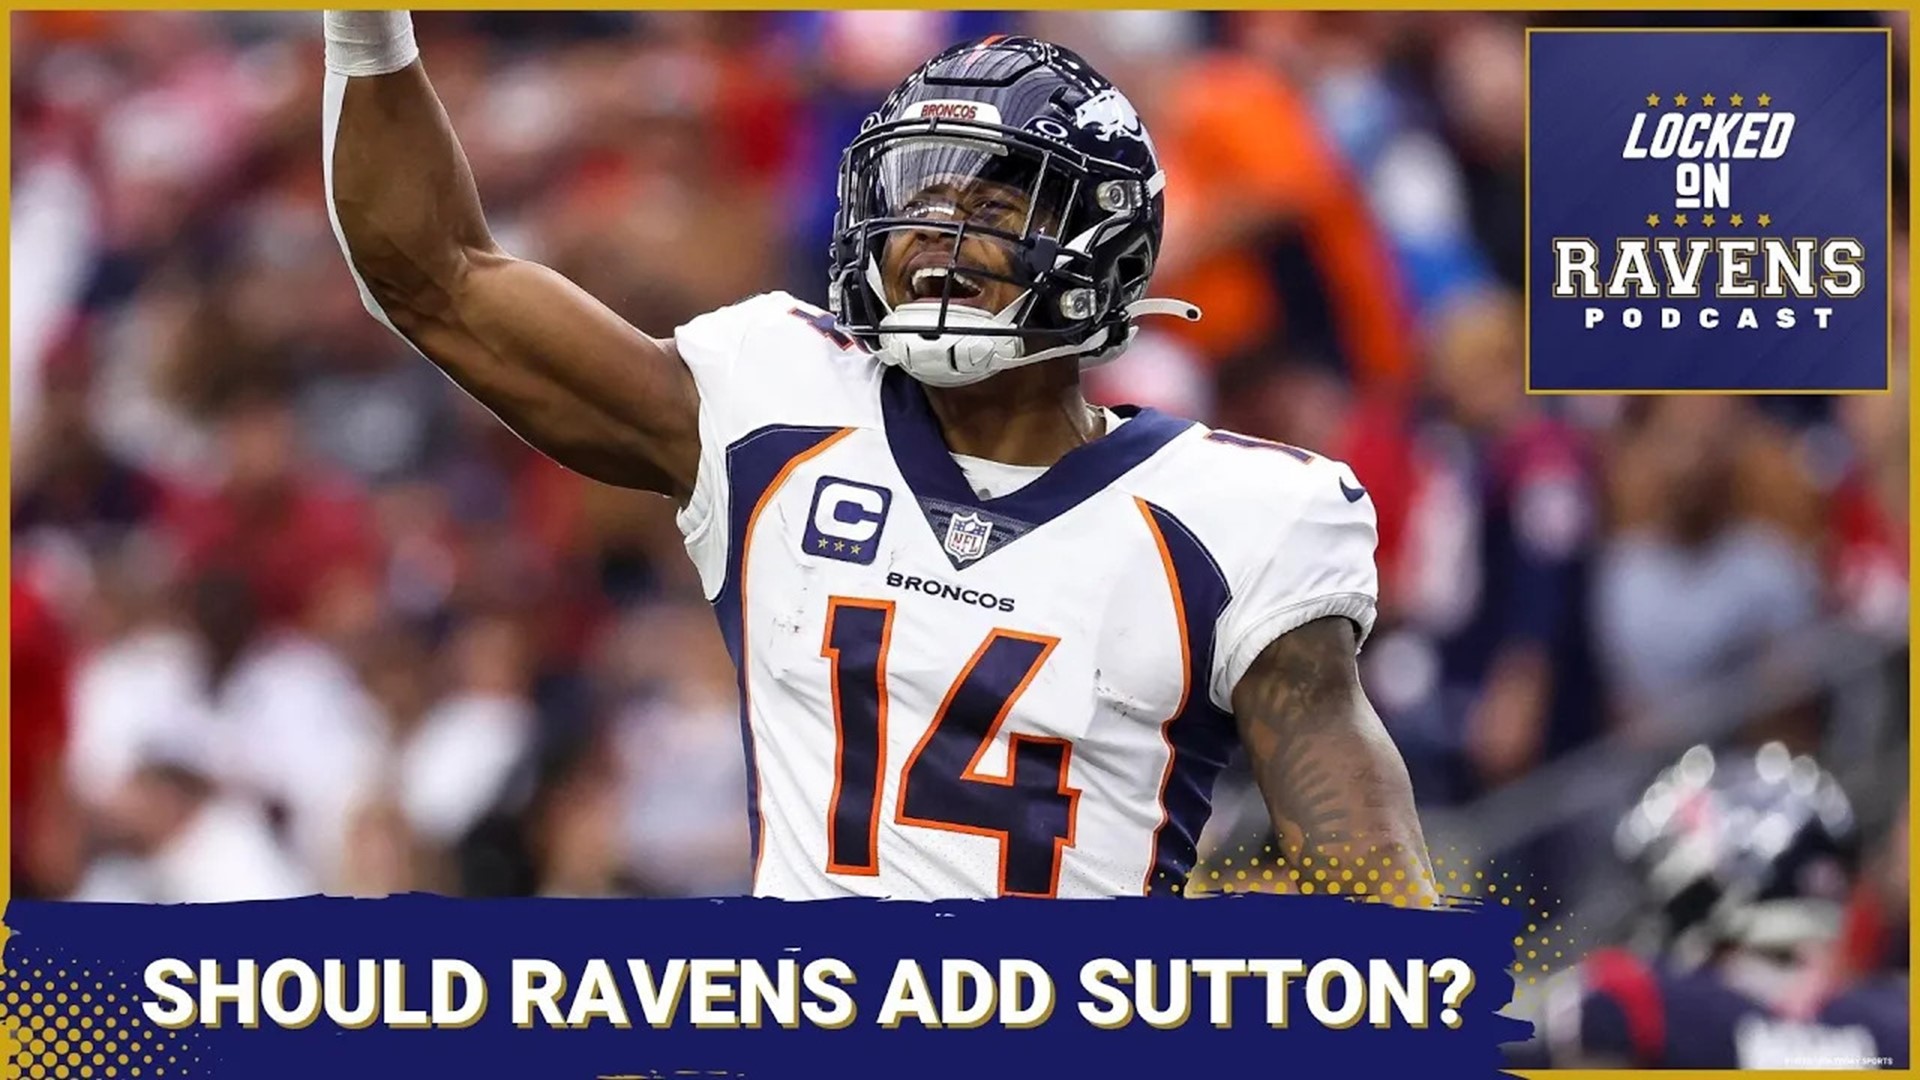 We look at if the Baltimore Ravens should add a trusted weapon for quarterback Lamar Jackson and trade for Denver Broncos' WR Courtland Sutton.